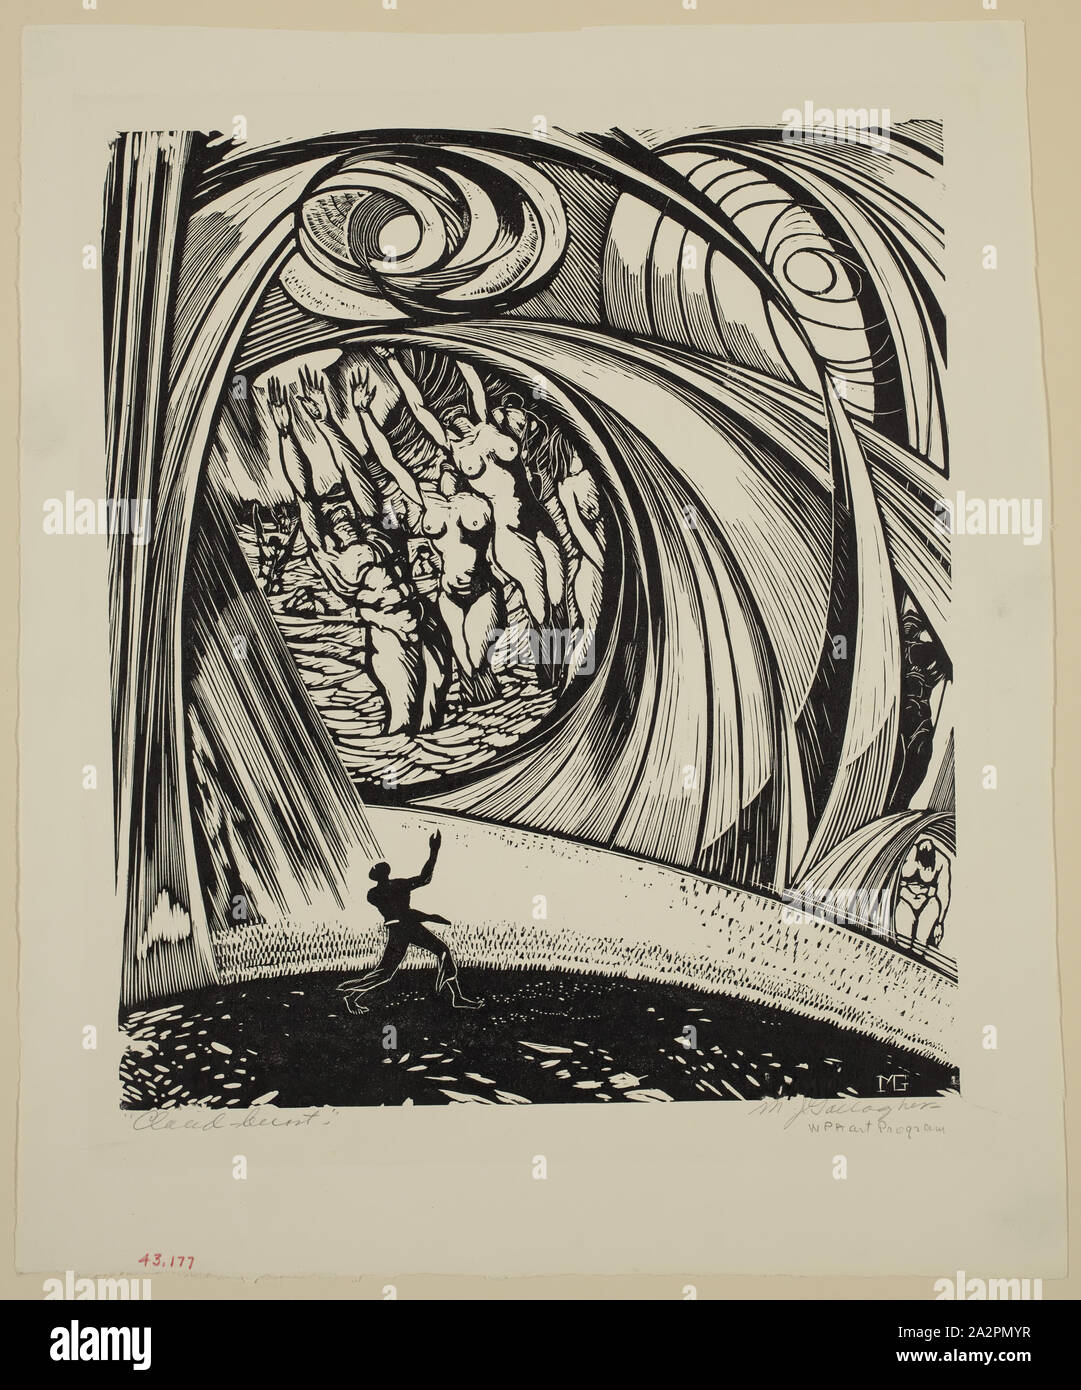 Michael J. Gallagher, American, born 1898, Cloud Burst, between 1934 and 1943, woodcut printed in black ink on wove paper, Image: 10 1/2 × 9 inches (26.7 × 22.9 cm Stock Photo